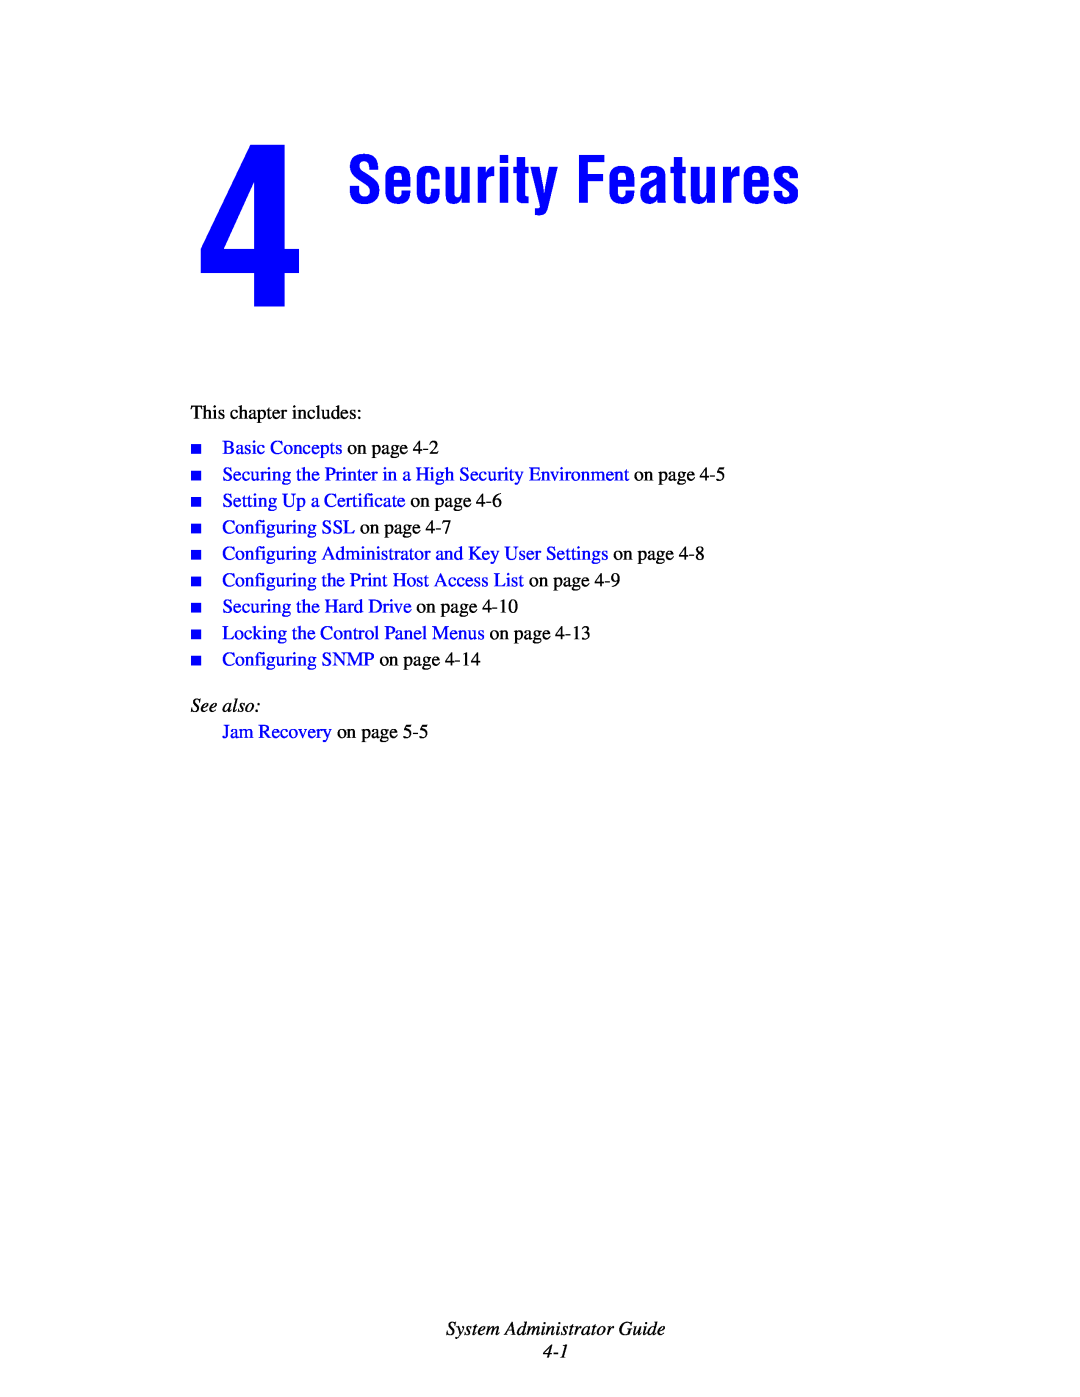 Xerox 6300, 6350, 8500, 8550 manual Security Features, Basic Concepts on page, Setting Up a Certificate on page, See also 